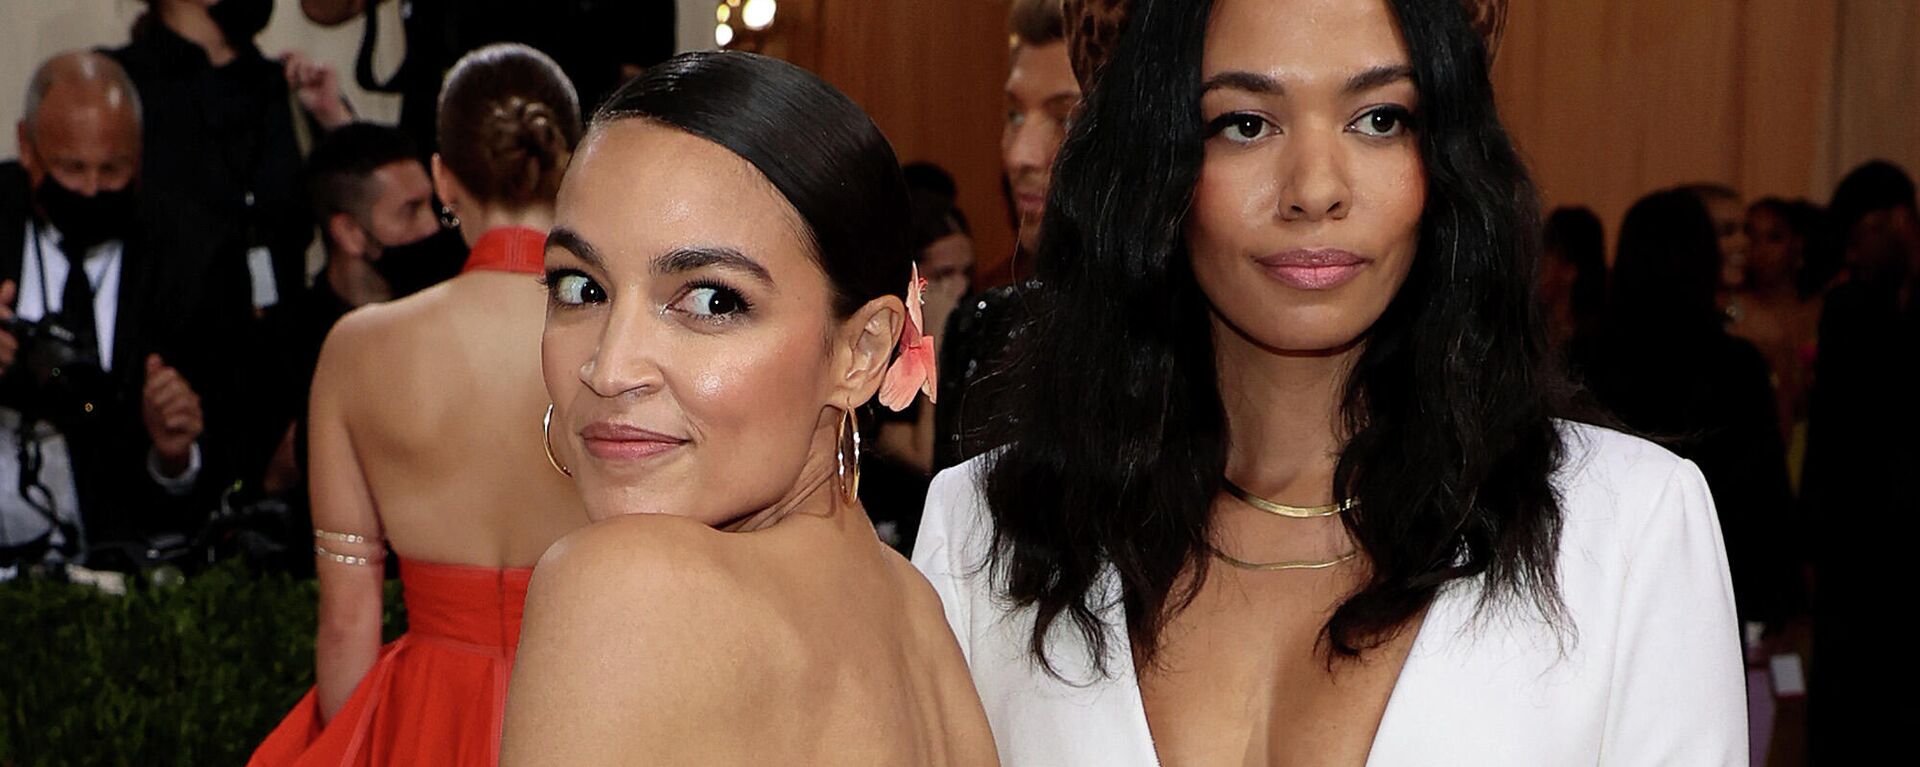 Alexandria Ocasio-Cortez and Aurora James attend The 2021 Met Gala Celebrating In America: A Lexicon Of Fashion at Metropolitan Museum of Art on September 13, 2021 in New York City - Sputnik International, 1920, 17.09.2021